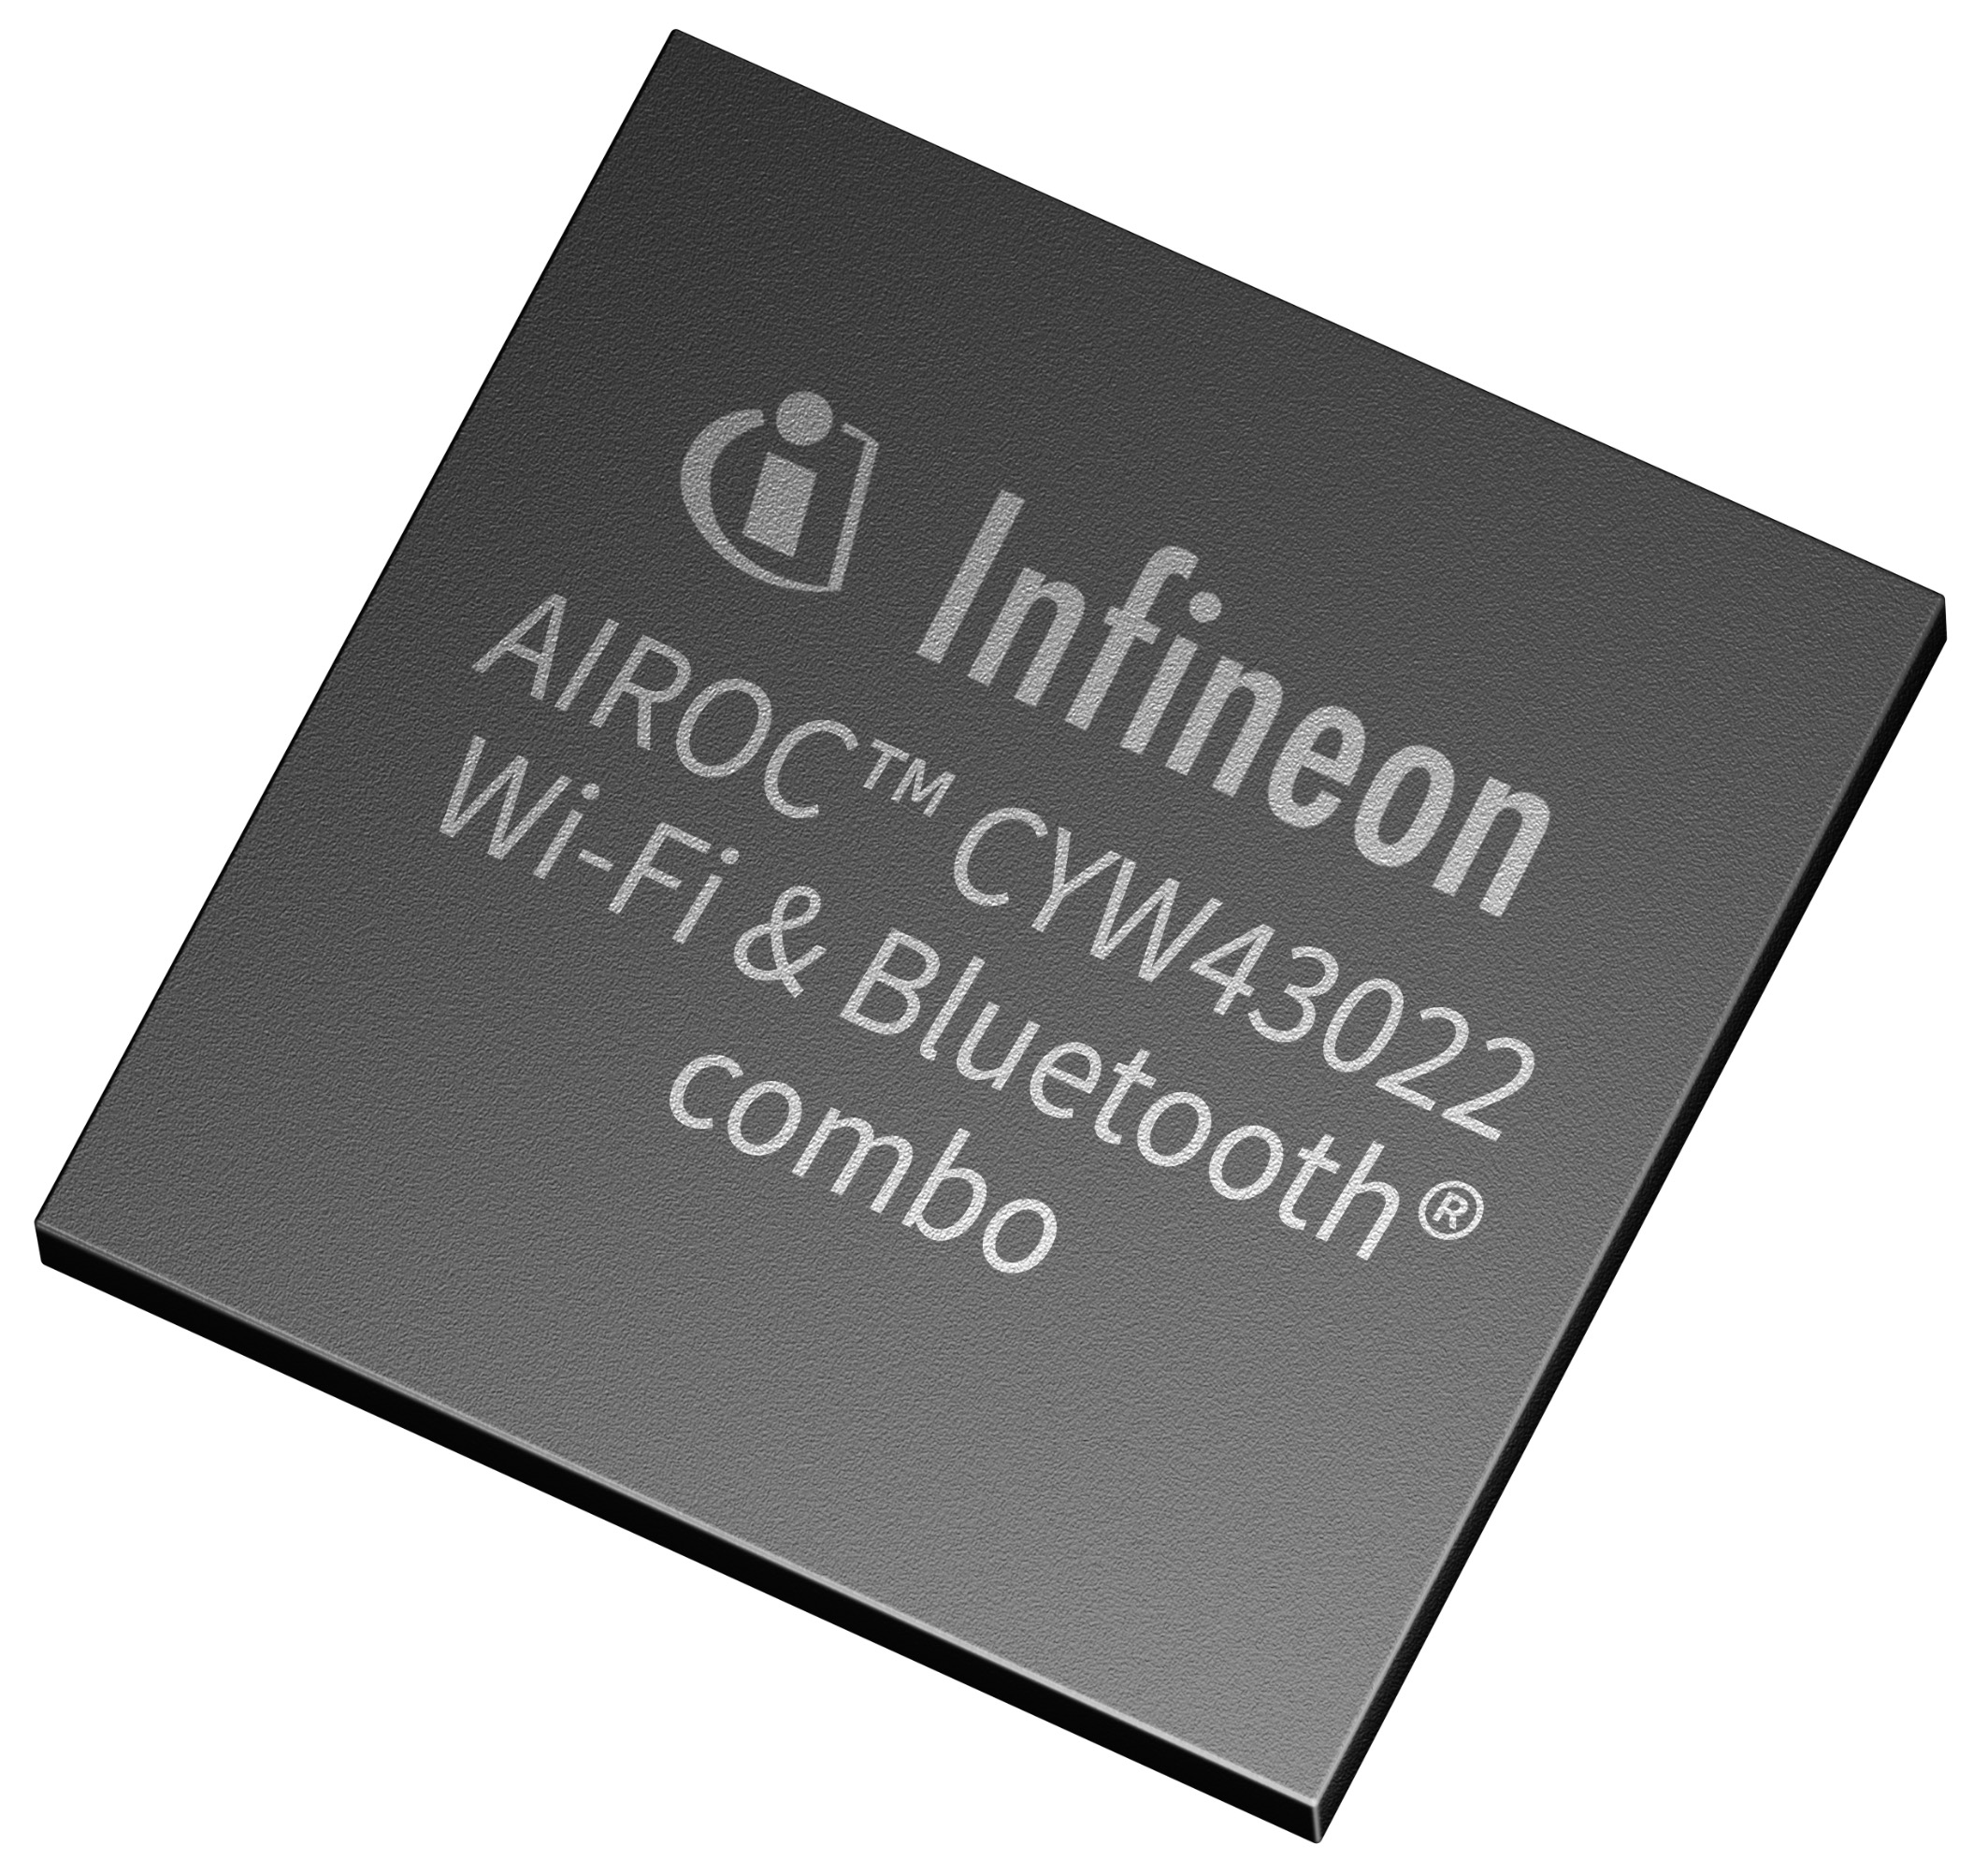 Infineon introduces AIROC™ CYW43022 Wi-Fi 5 and Bluetooth® 2-in-1 product, which reduces power consumption by 65%, significantly extending battery life in IoT applications - Immagine